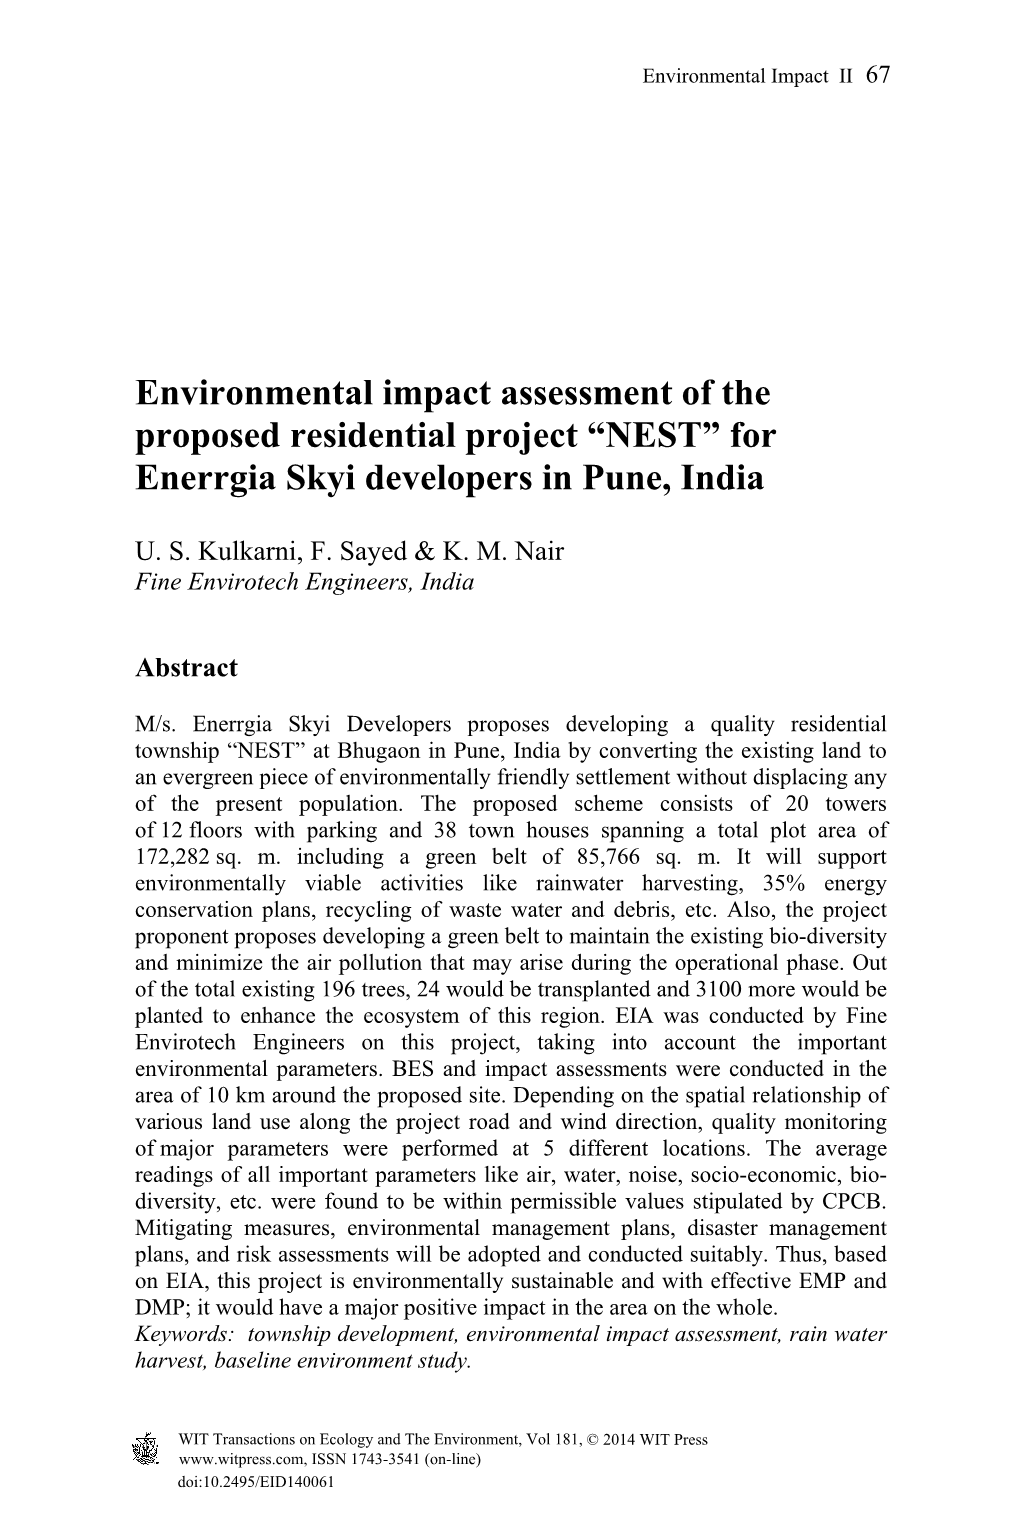 Environmental Impact Assessment of the Proposed Residential Project “NEST” for Enerrgia Skyi Developers in Pune, India